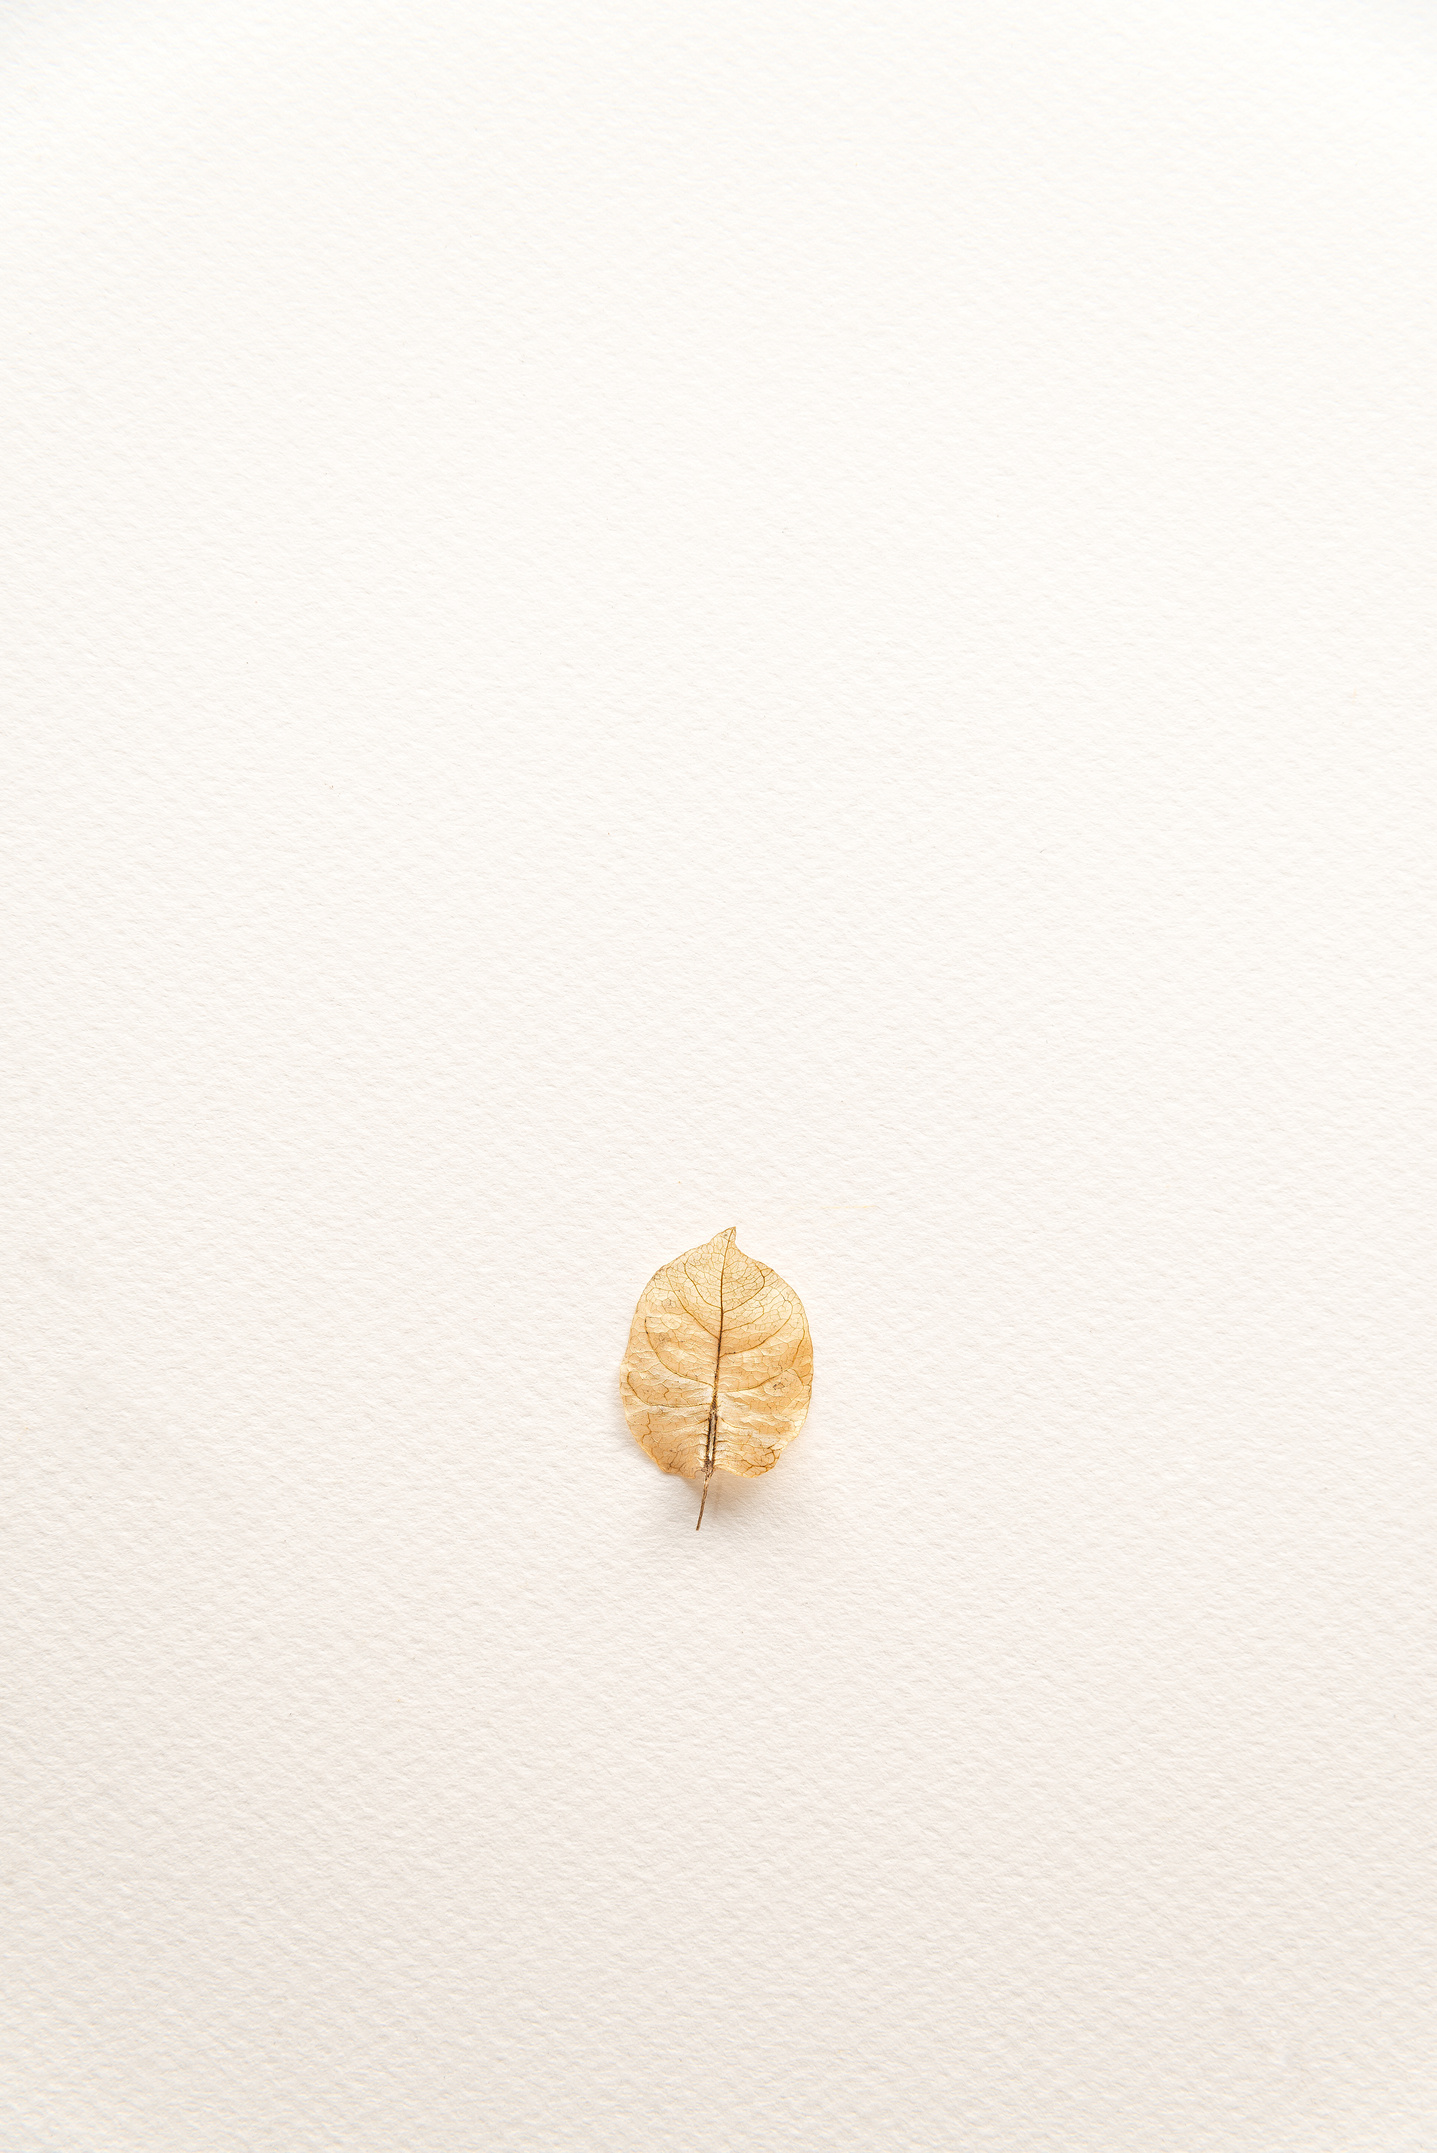 Brown Leaf on White Surface